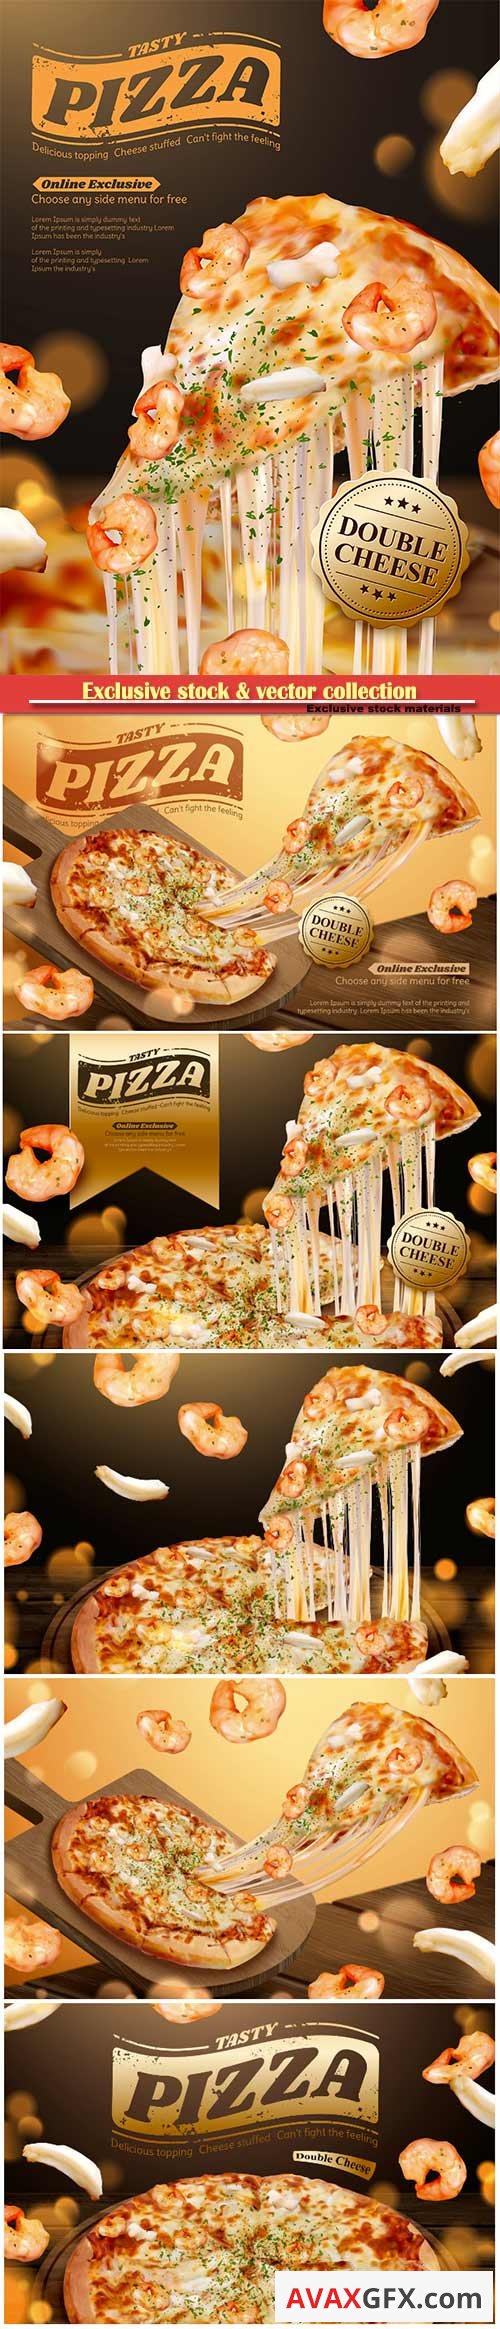 Tasty seafood pizza ads with stringy cheese in 3d illustration, shrimp and squid ring ingredients